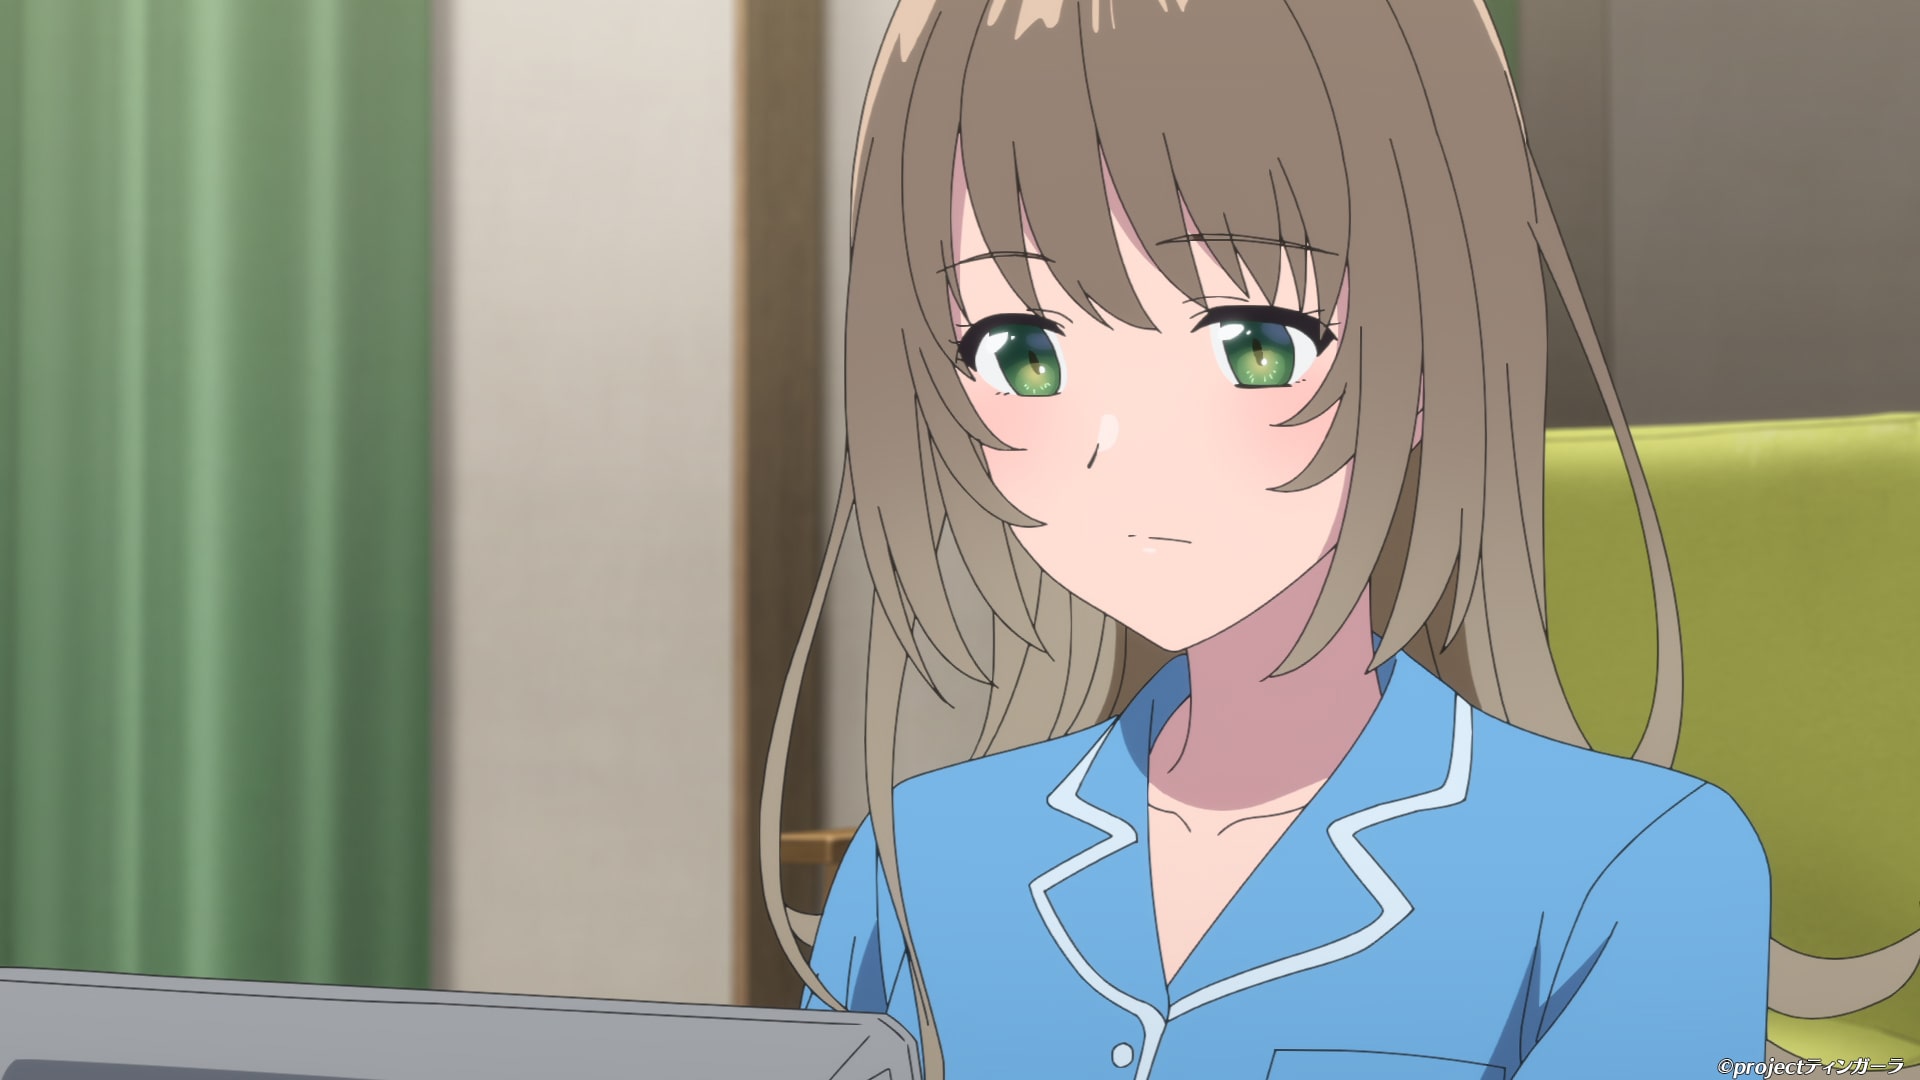 Fuuka doesn't want to be apart from Kukuru, and she worries about joining  in on a large-scale project. TV anime The Aquatope on White Sand Episode 23  synopsis and early scene preview